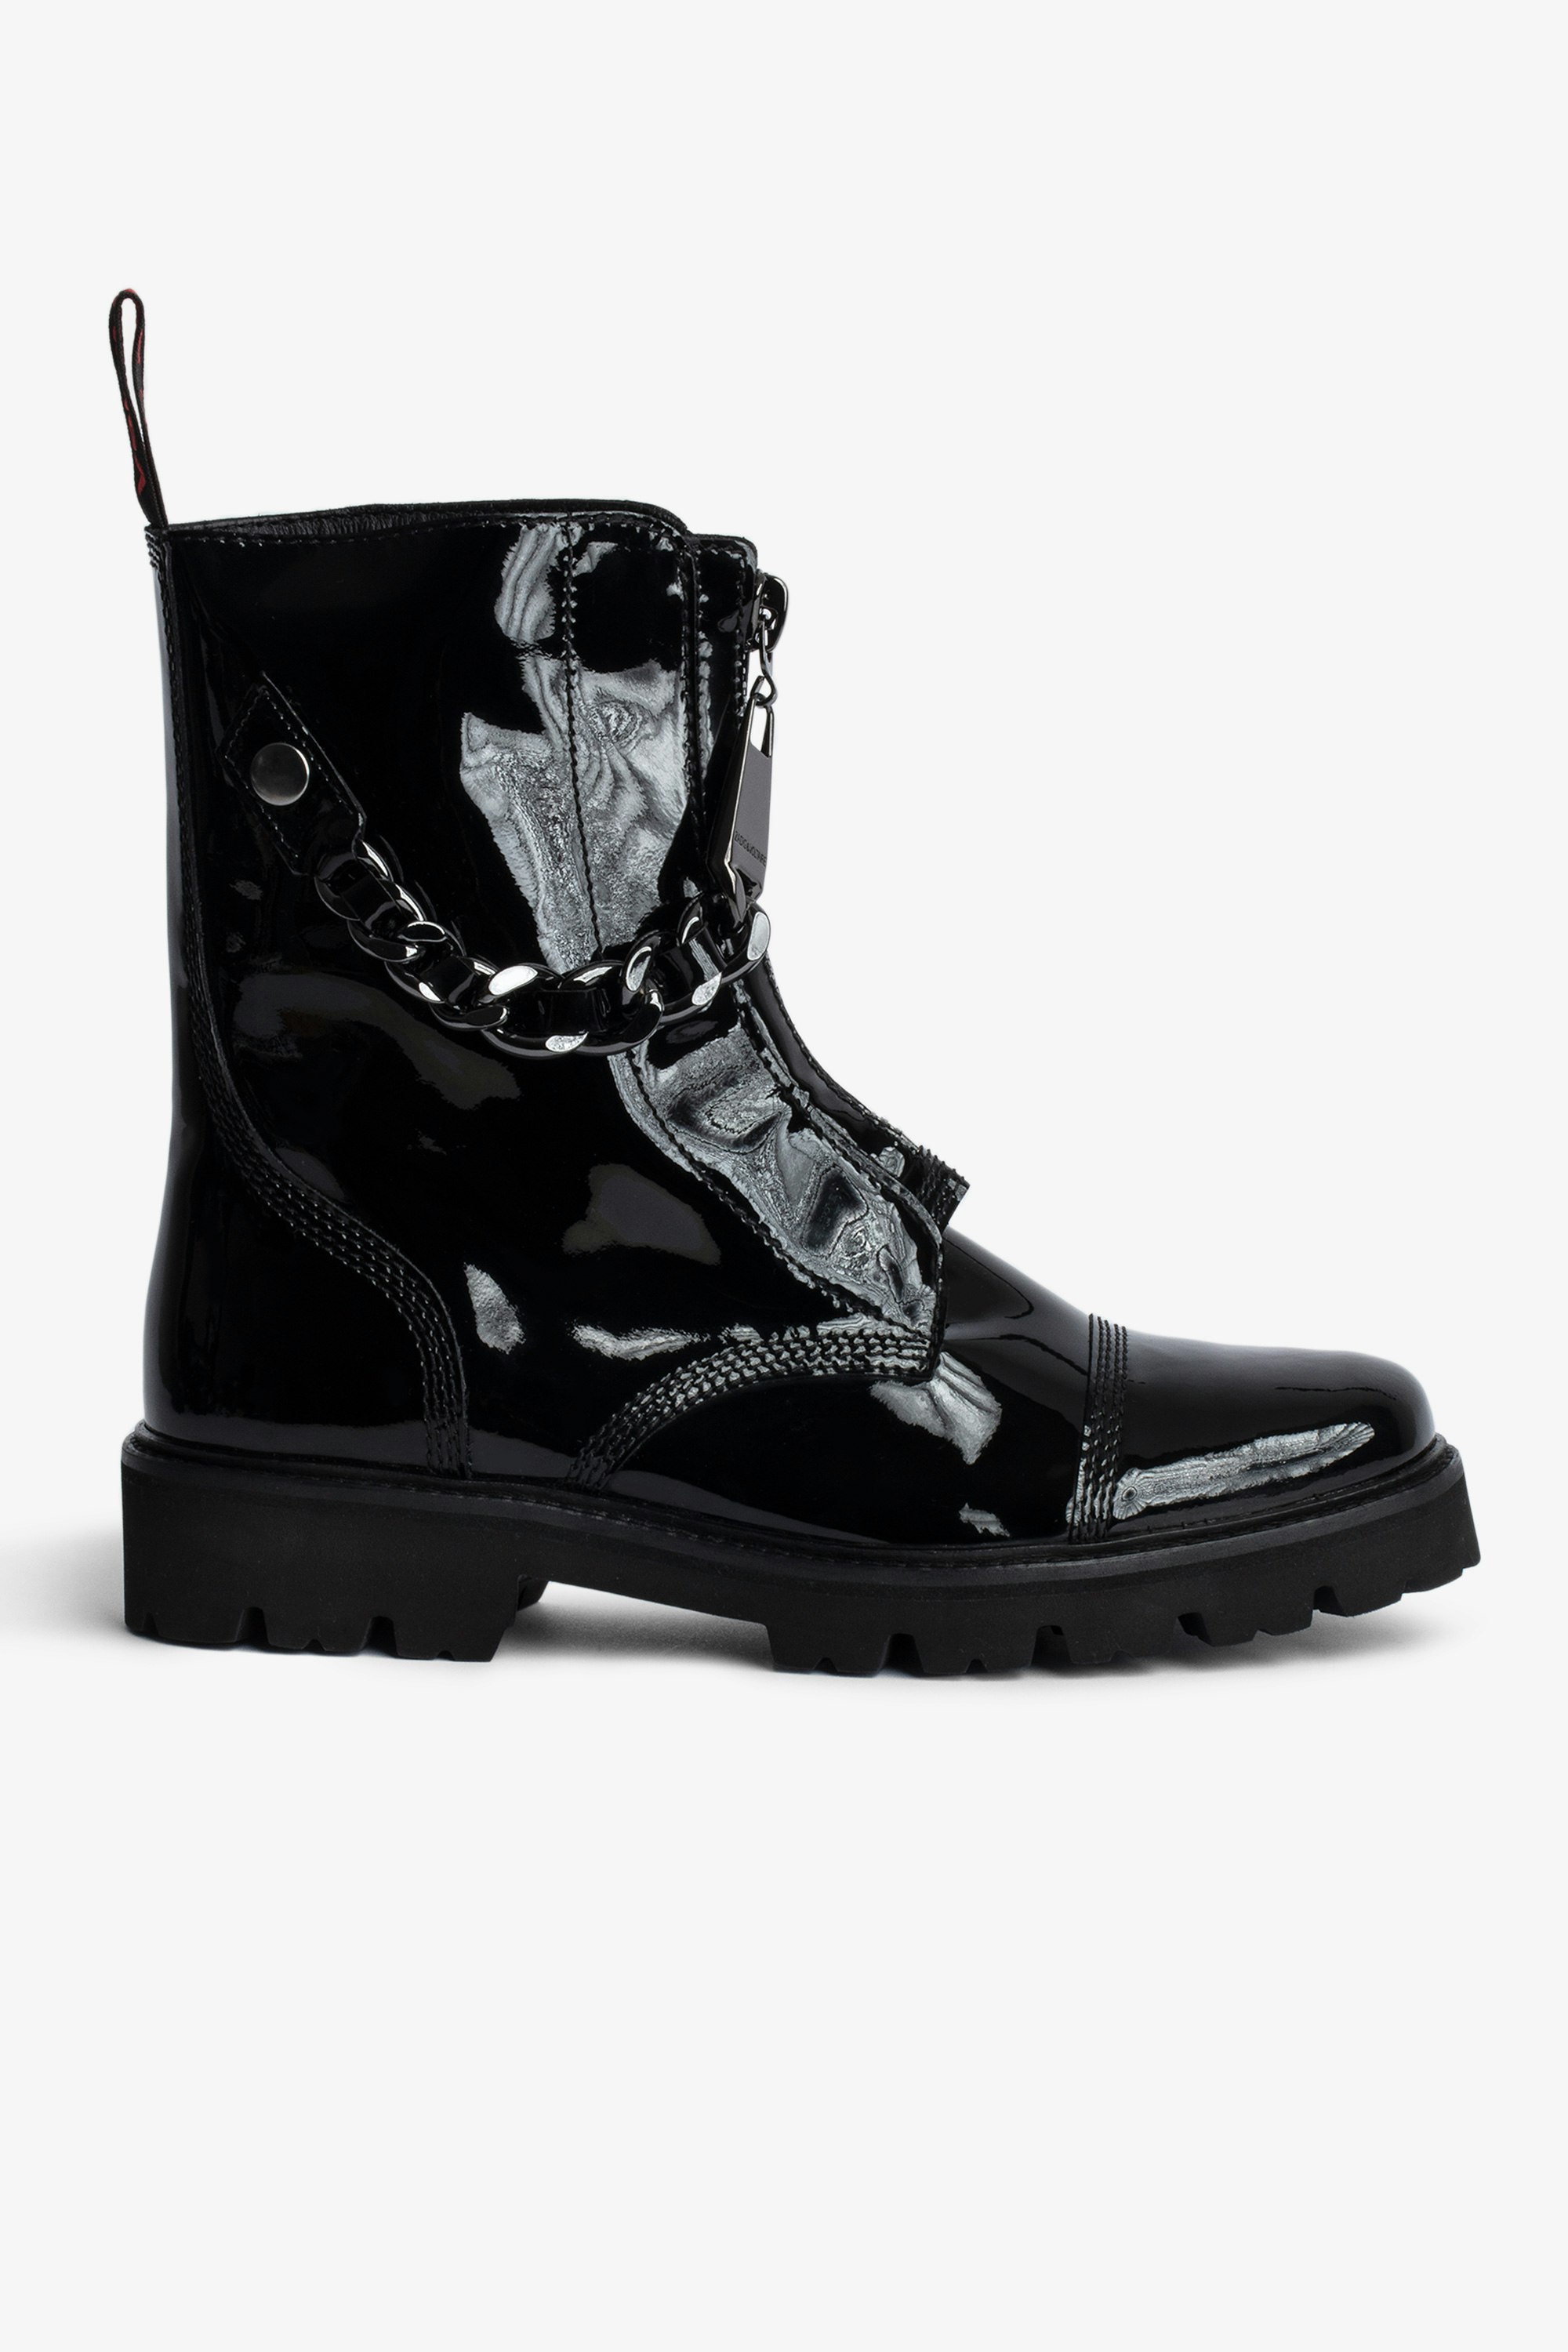 Joe Ankle ブーツ Women’s black patent leather mid-calf boots with an interwoven metal and leather chain